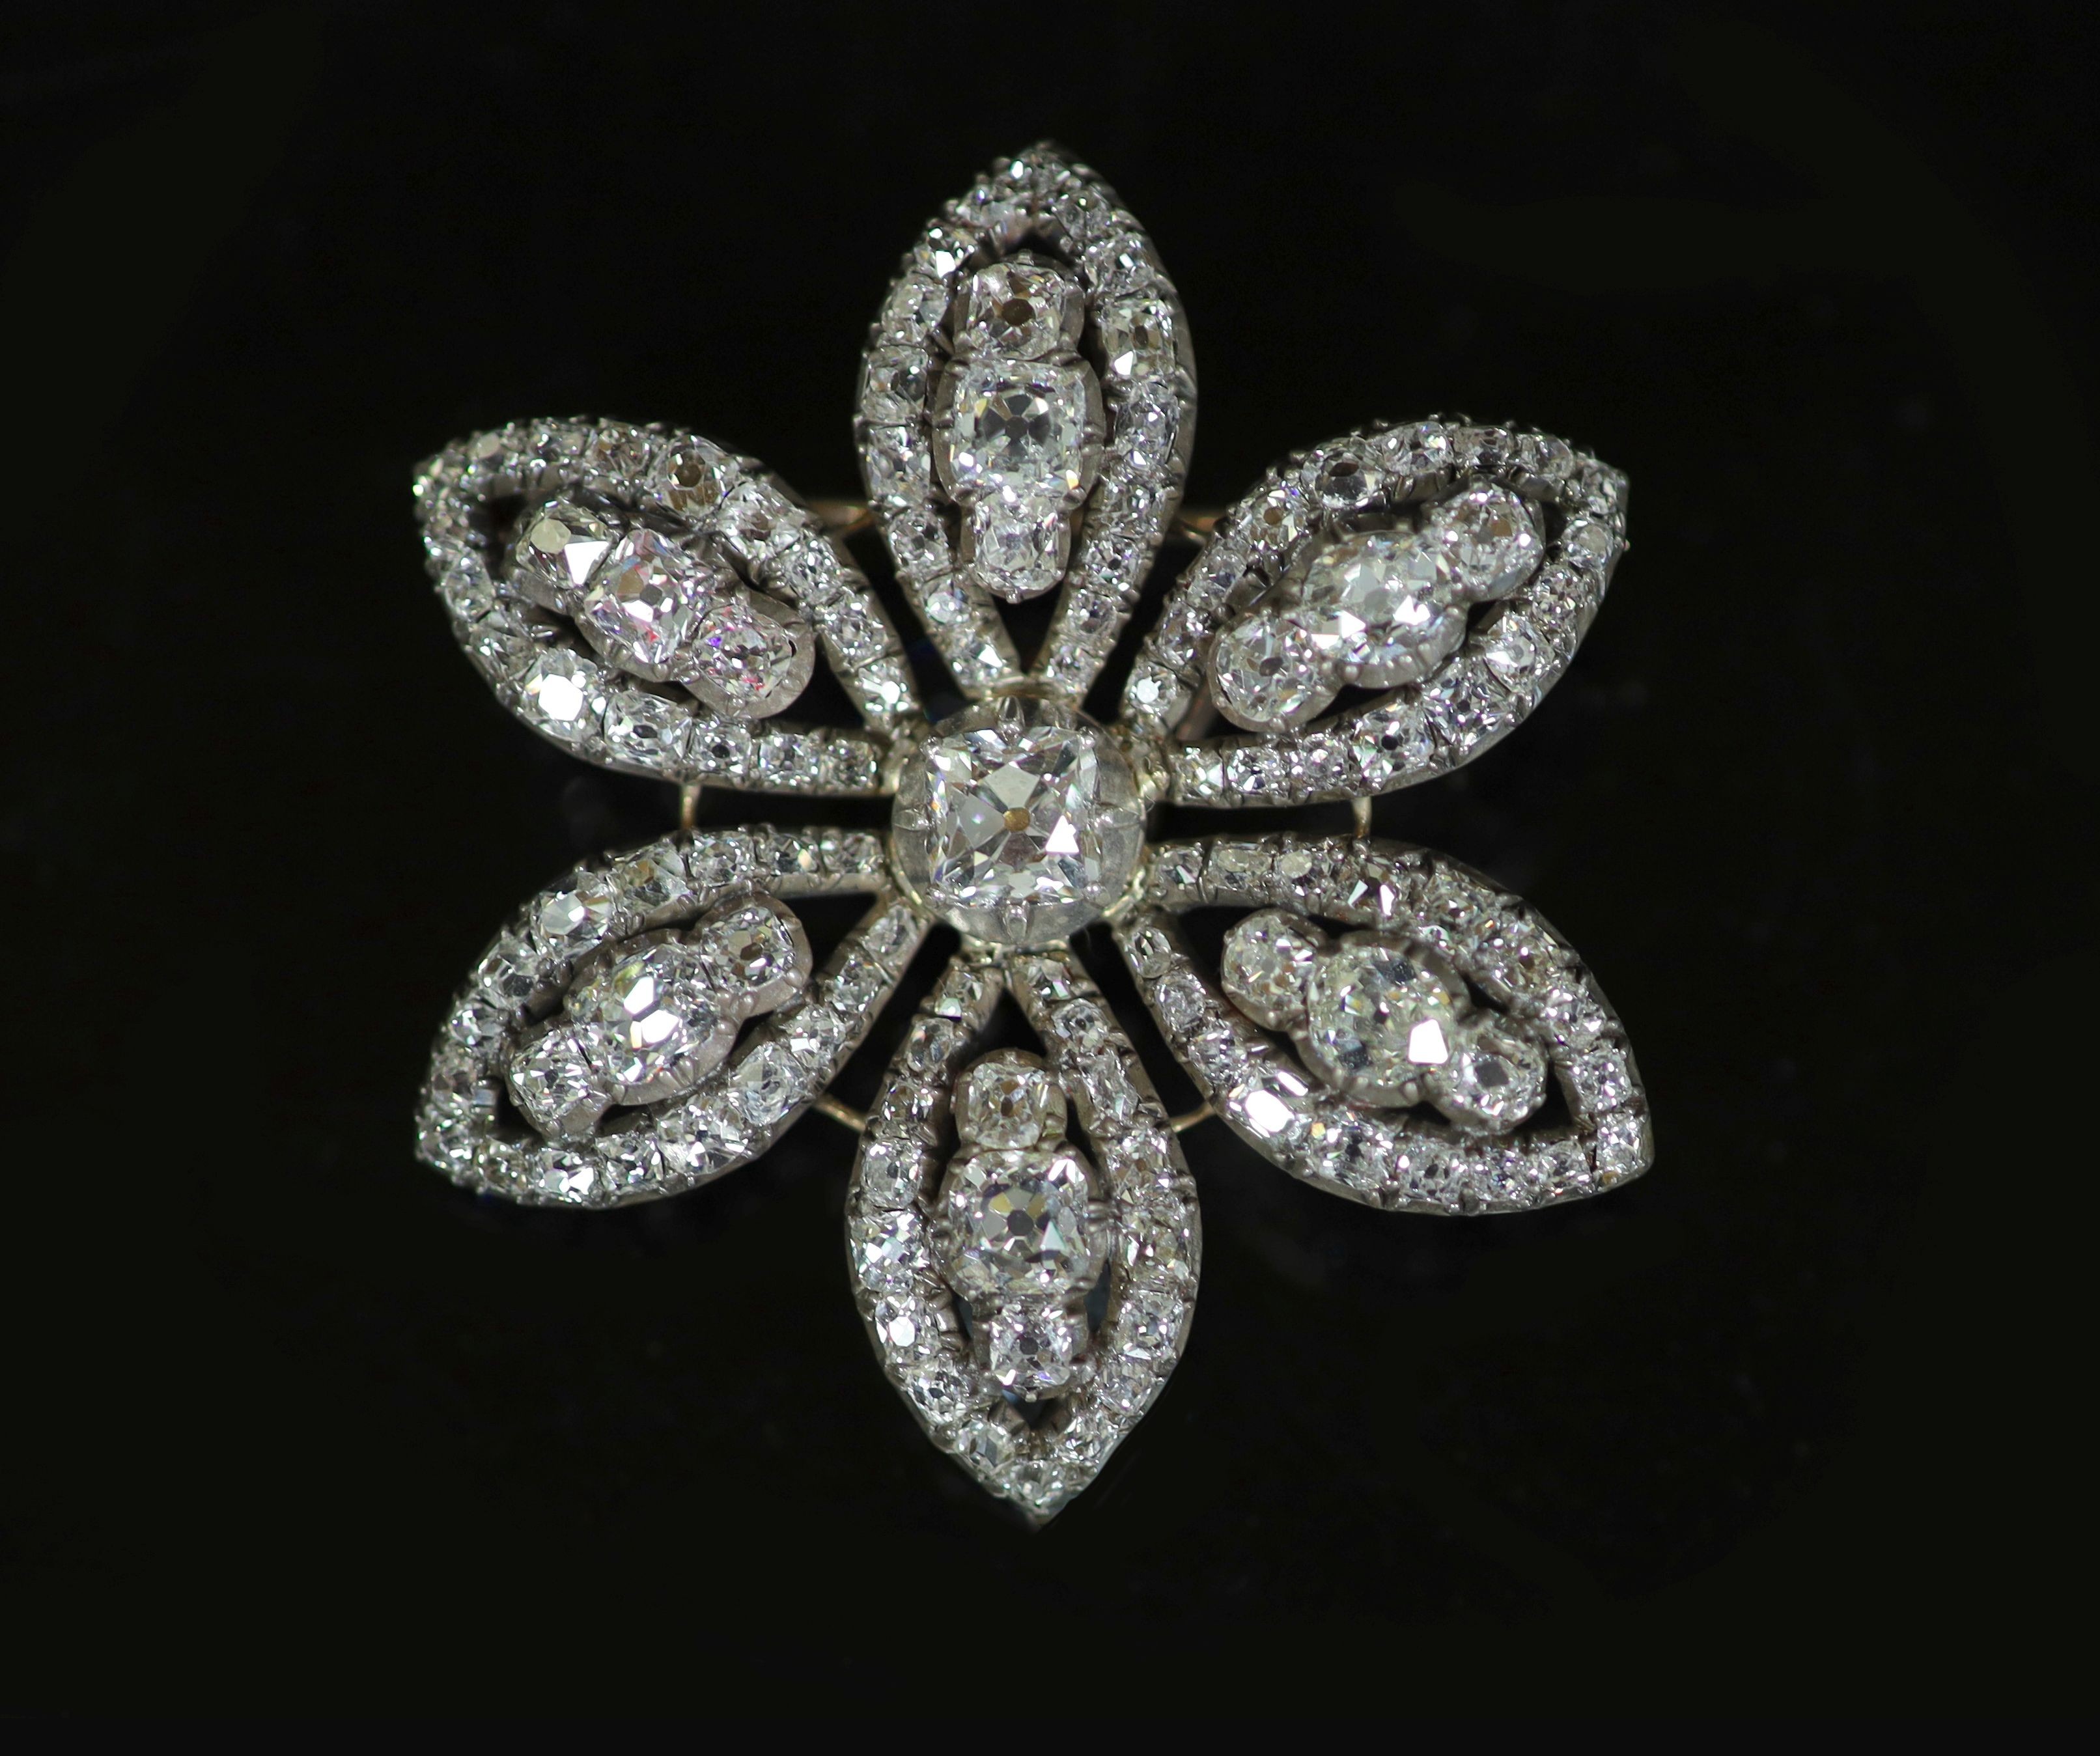 An early 19th century gold, silver and diamond encrusted flower head pendant, with detachable brooch attachment